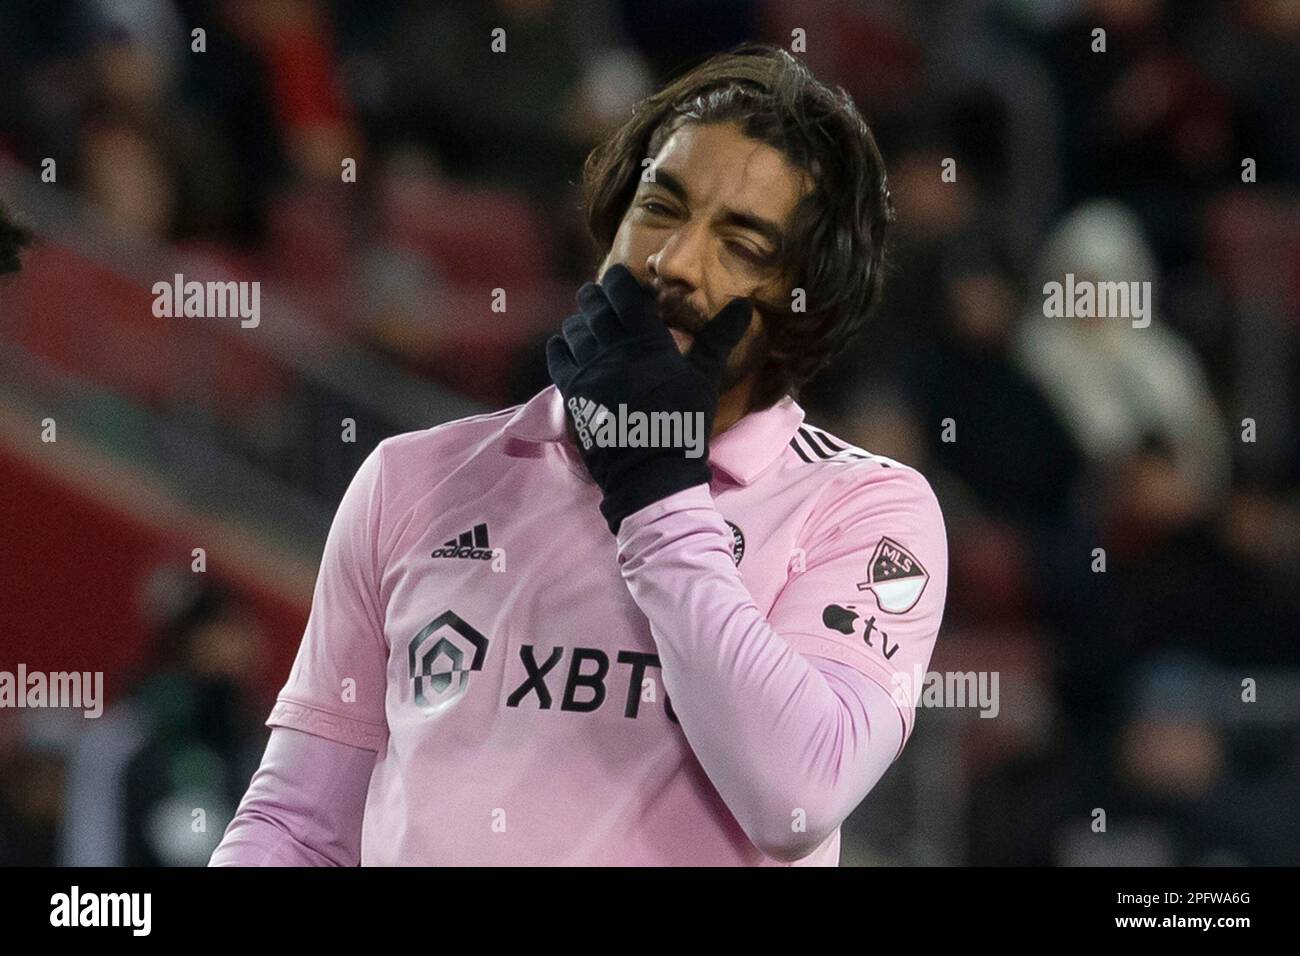 Inter Miami's Rodolfo Pizarro reacts after missing a scoring opportunity  against Toronto FC during the first half of an MLS soccer match in Toronto,  Saturday, March 18, 2023. (Chris Young/The Canadian Press